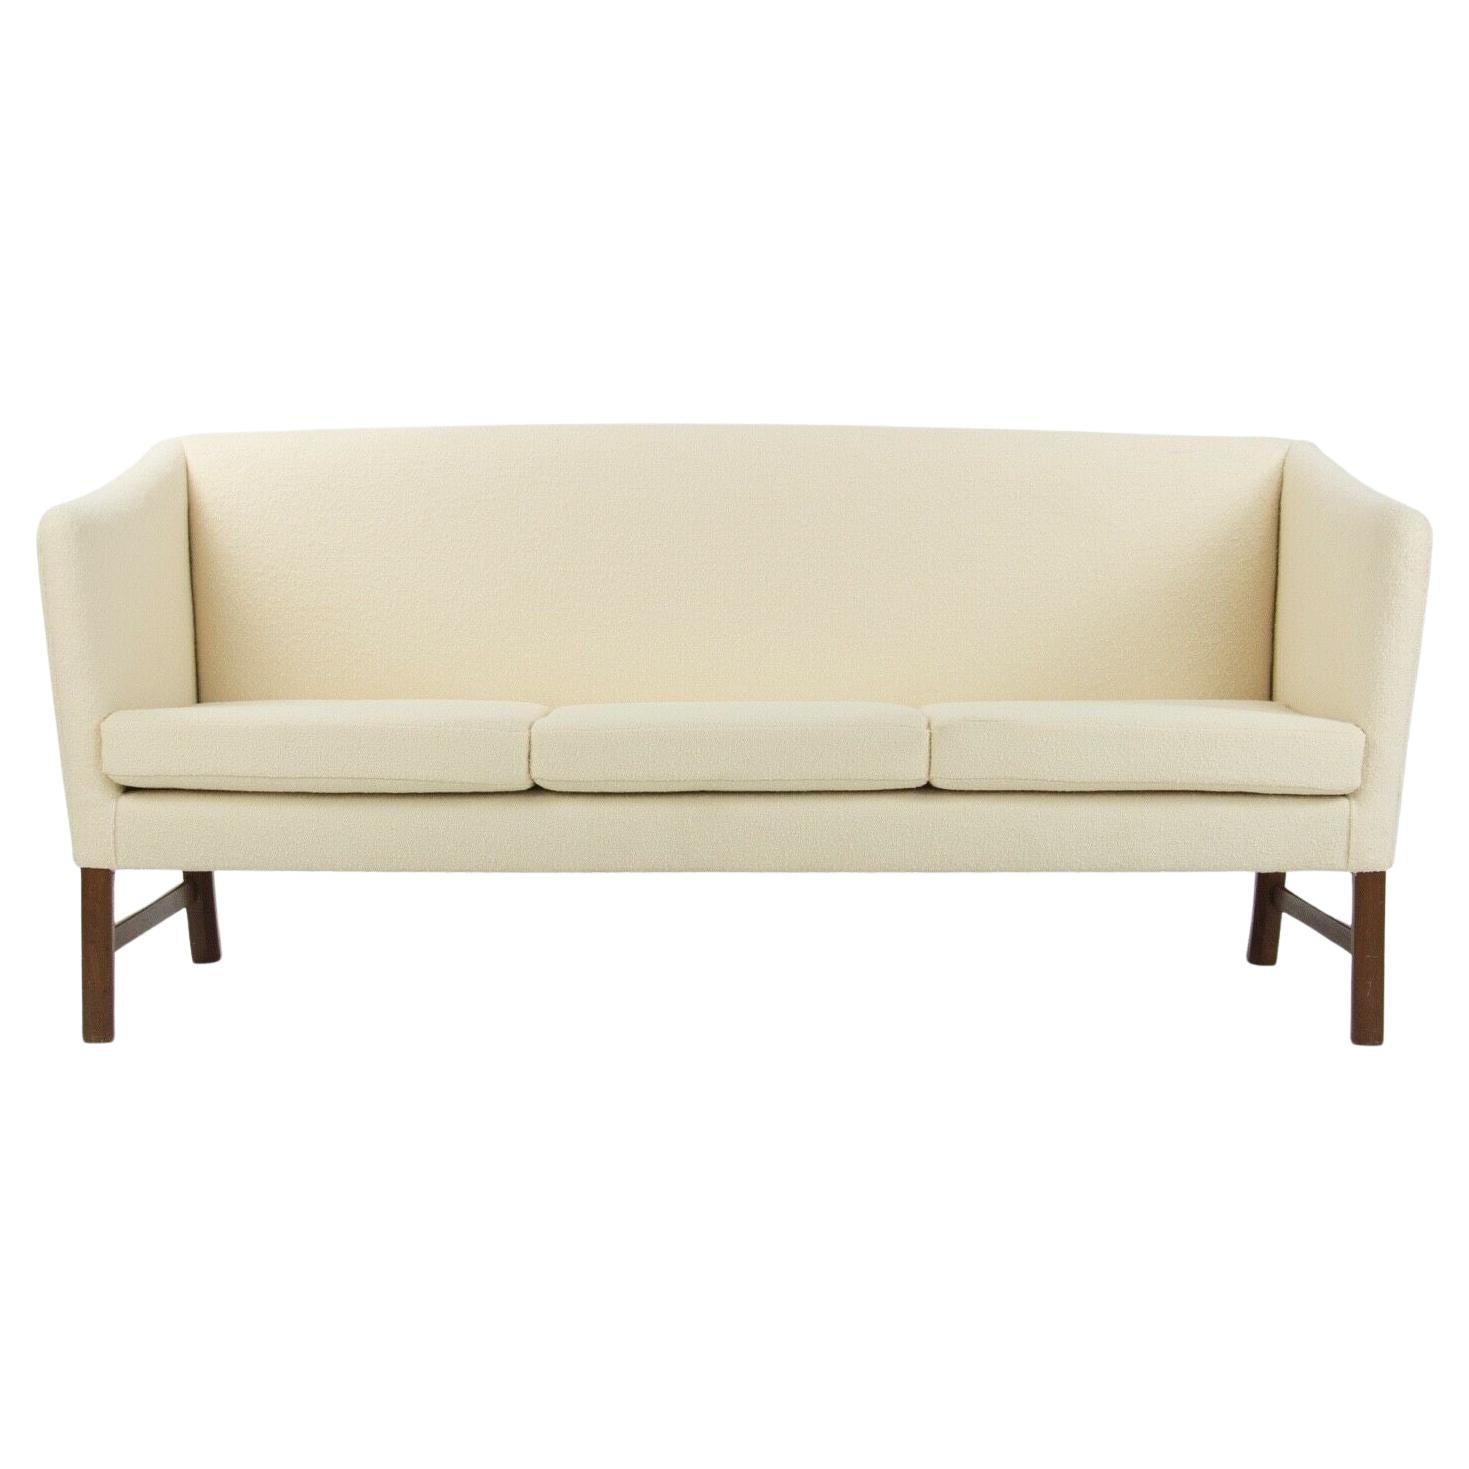 1960s Ole Wanscher for AJ Iversen New Boucle Fabric 3-Seat Sofa Made in Denmark For Sale